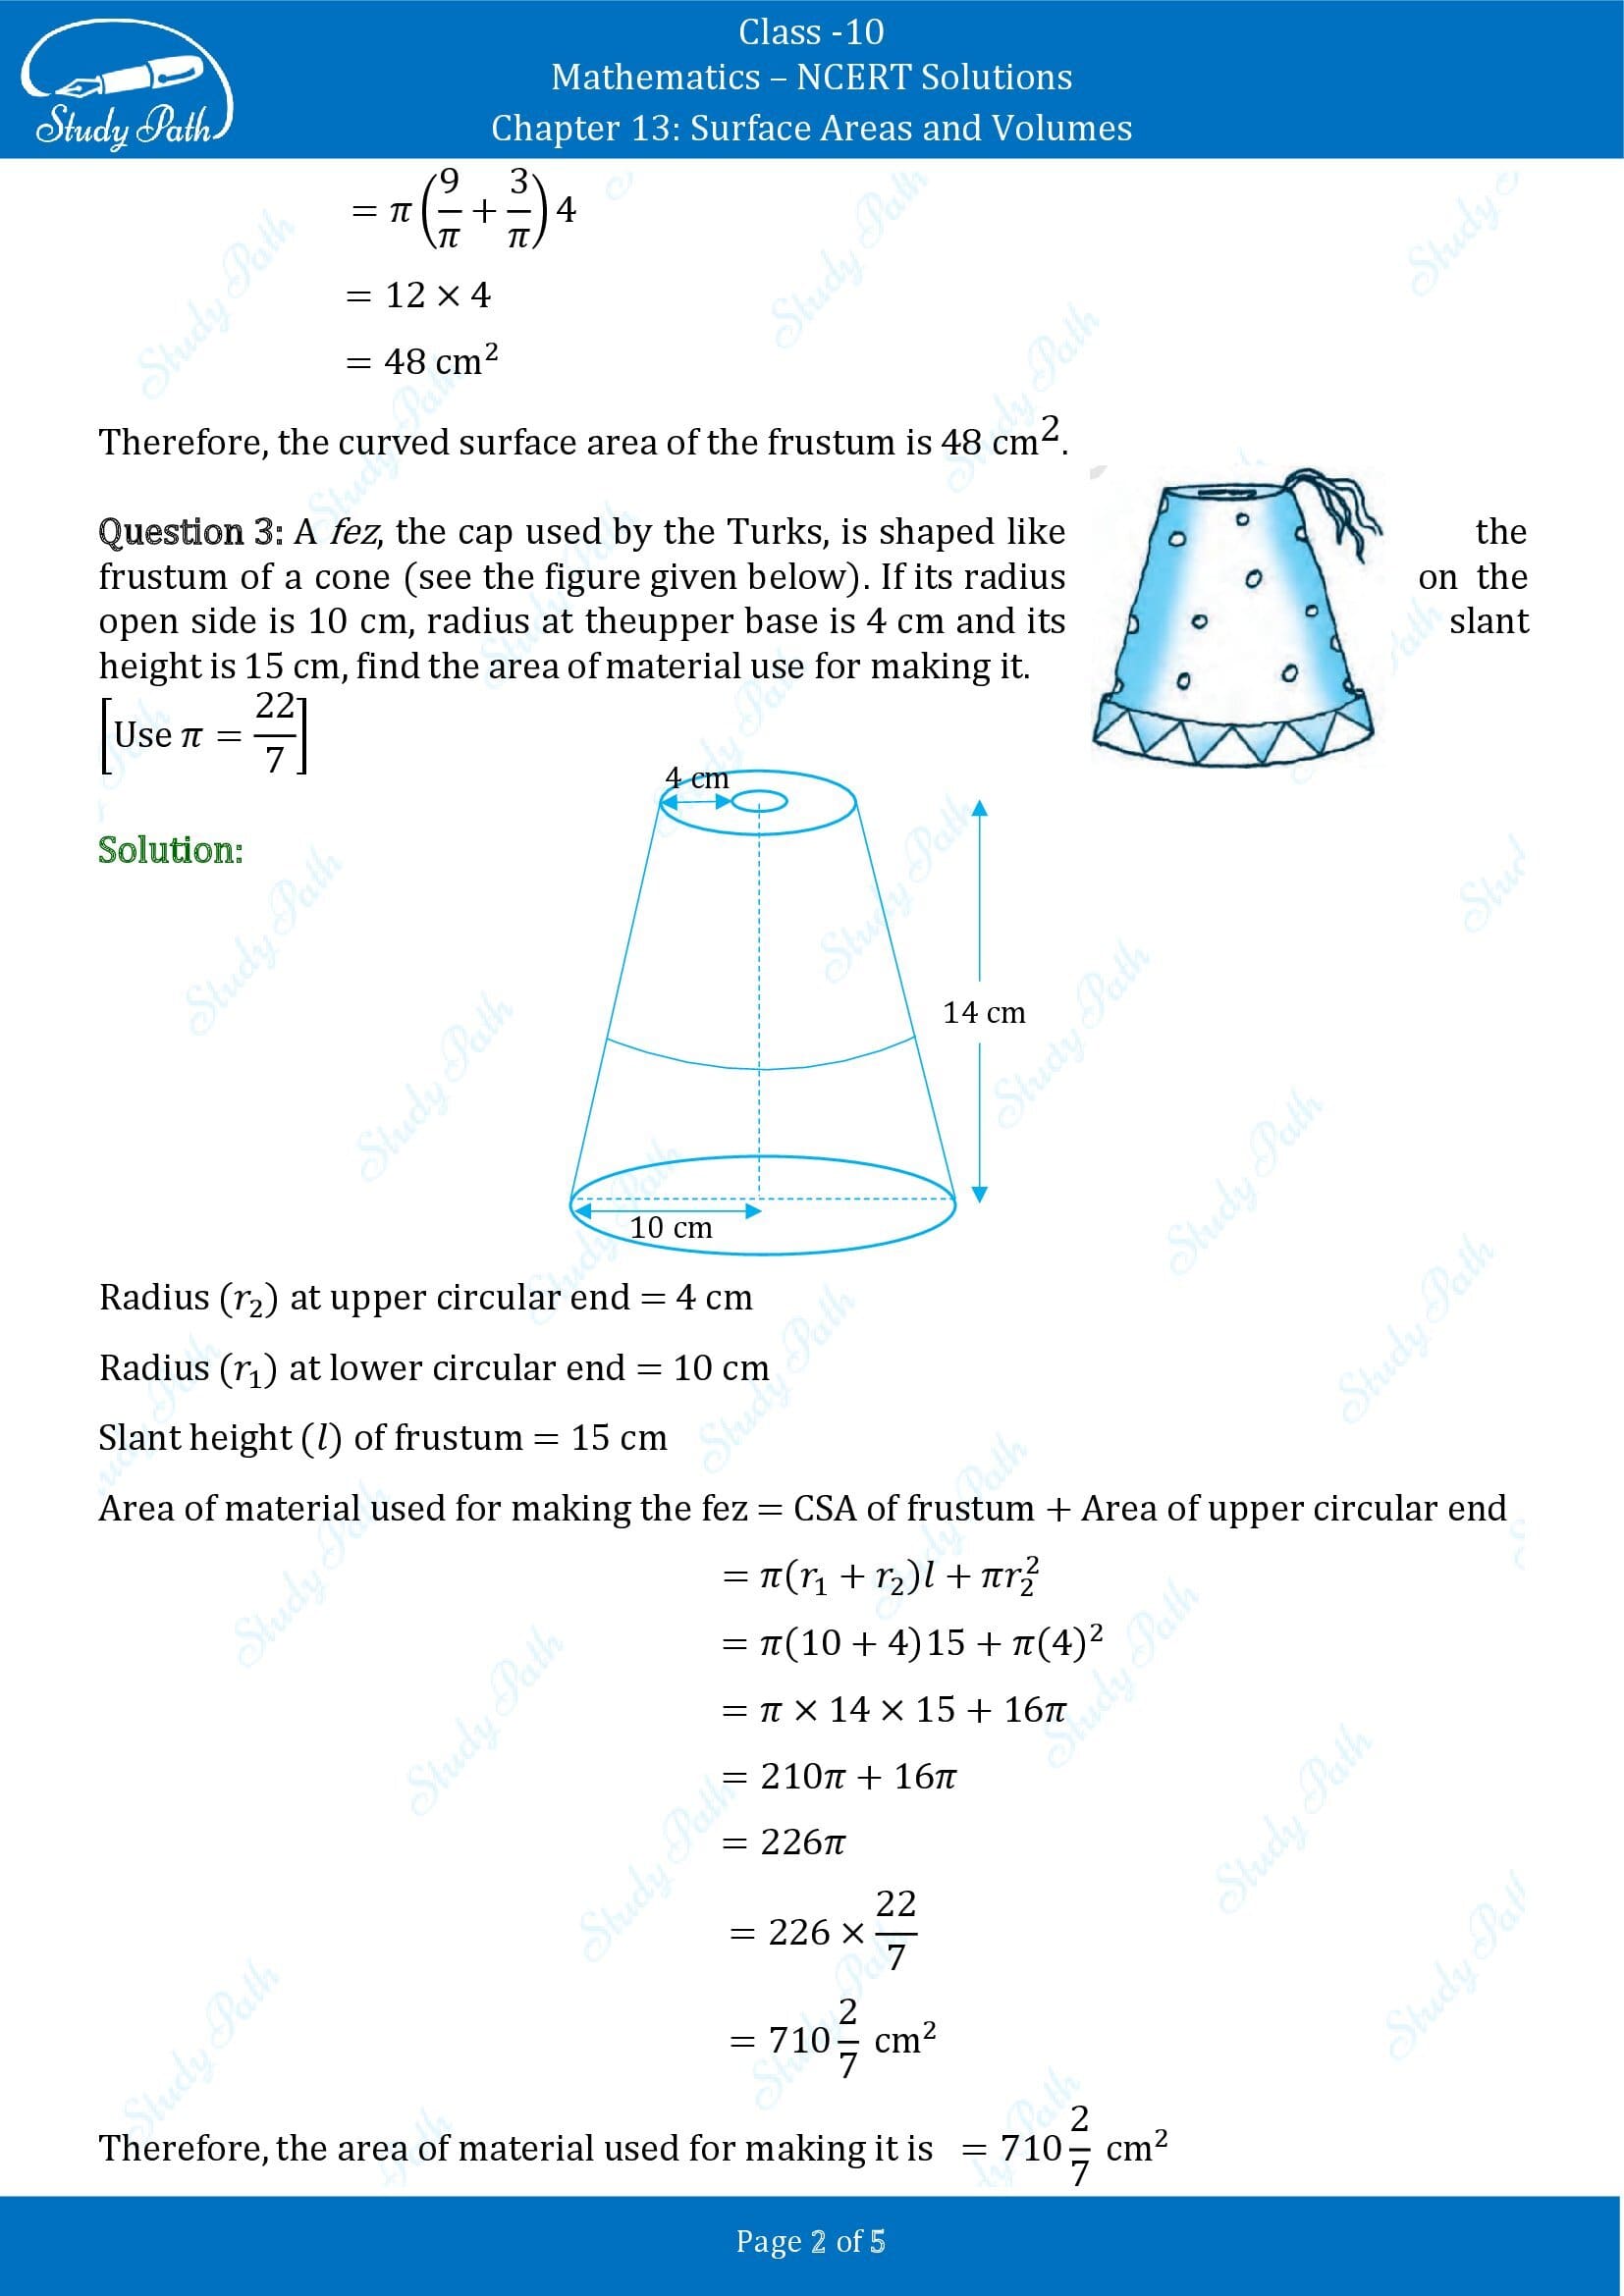 NCERT Solutions for Class 10 Maths Chapter 13 Surface Areas and Volumes Exercise 13.4 00002